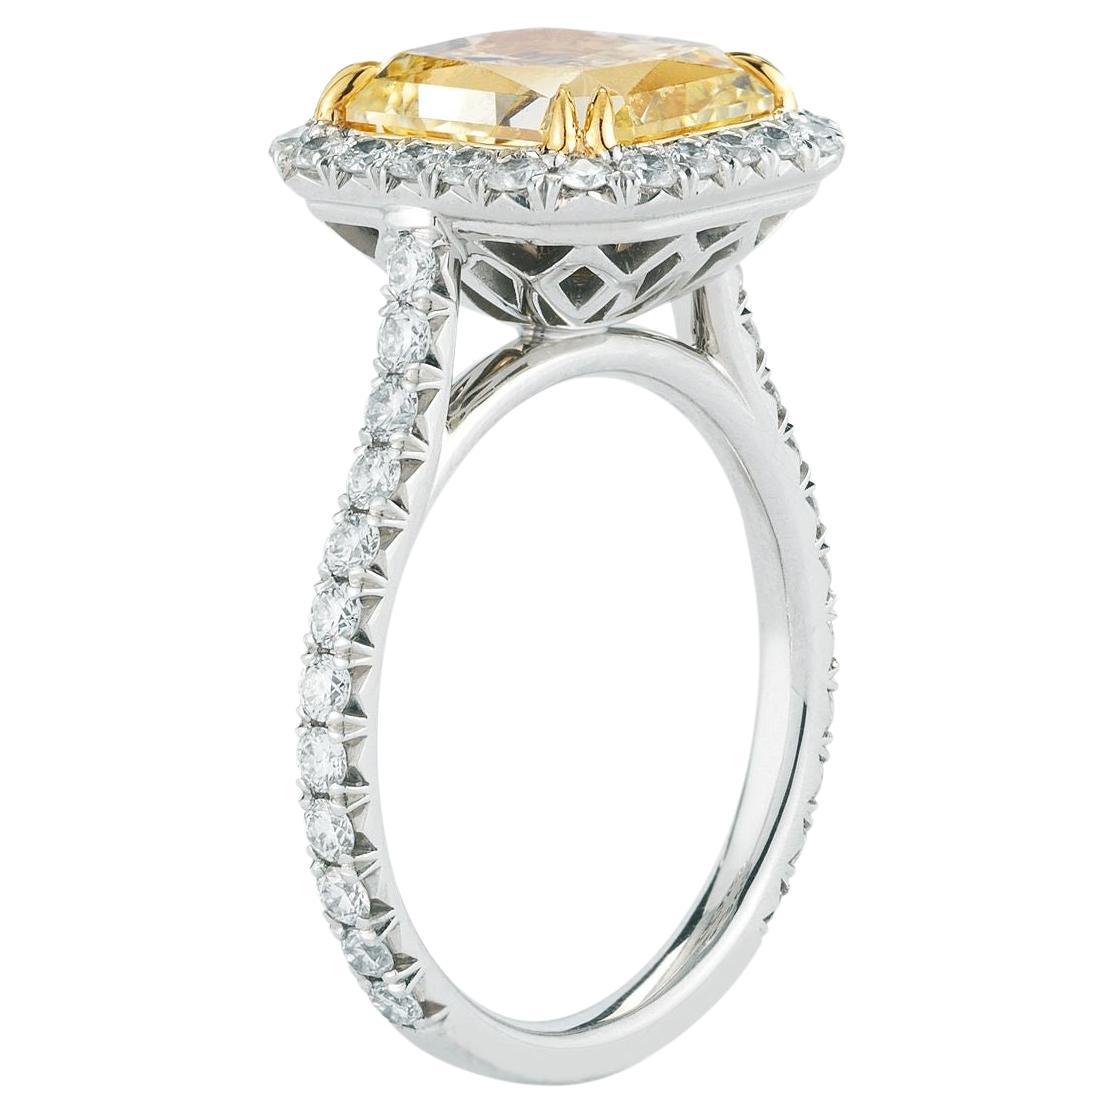 An exquisite Fancy Yellow Diamond Ring
set in solid Platinum and 18 carats yellow gold with a lovely Halo Diamond Ring 
